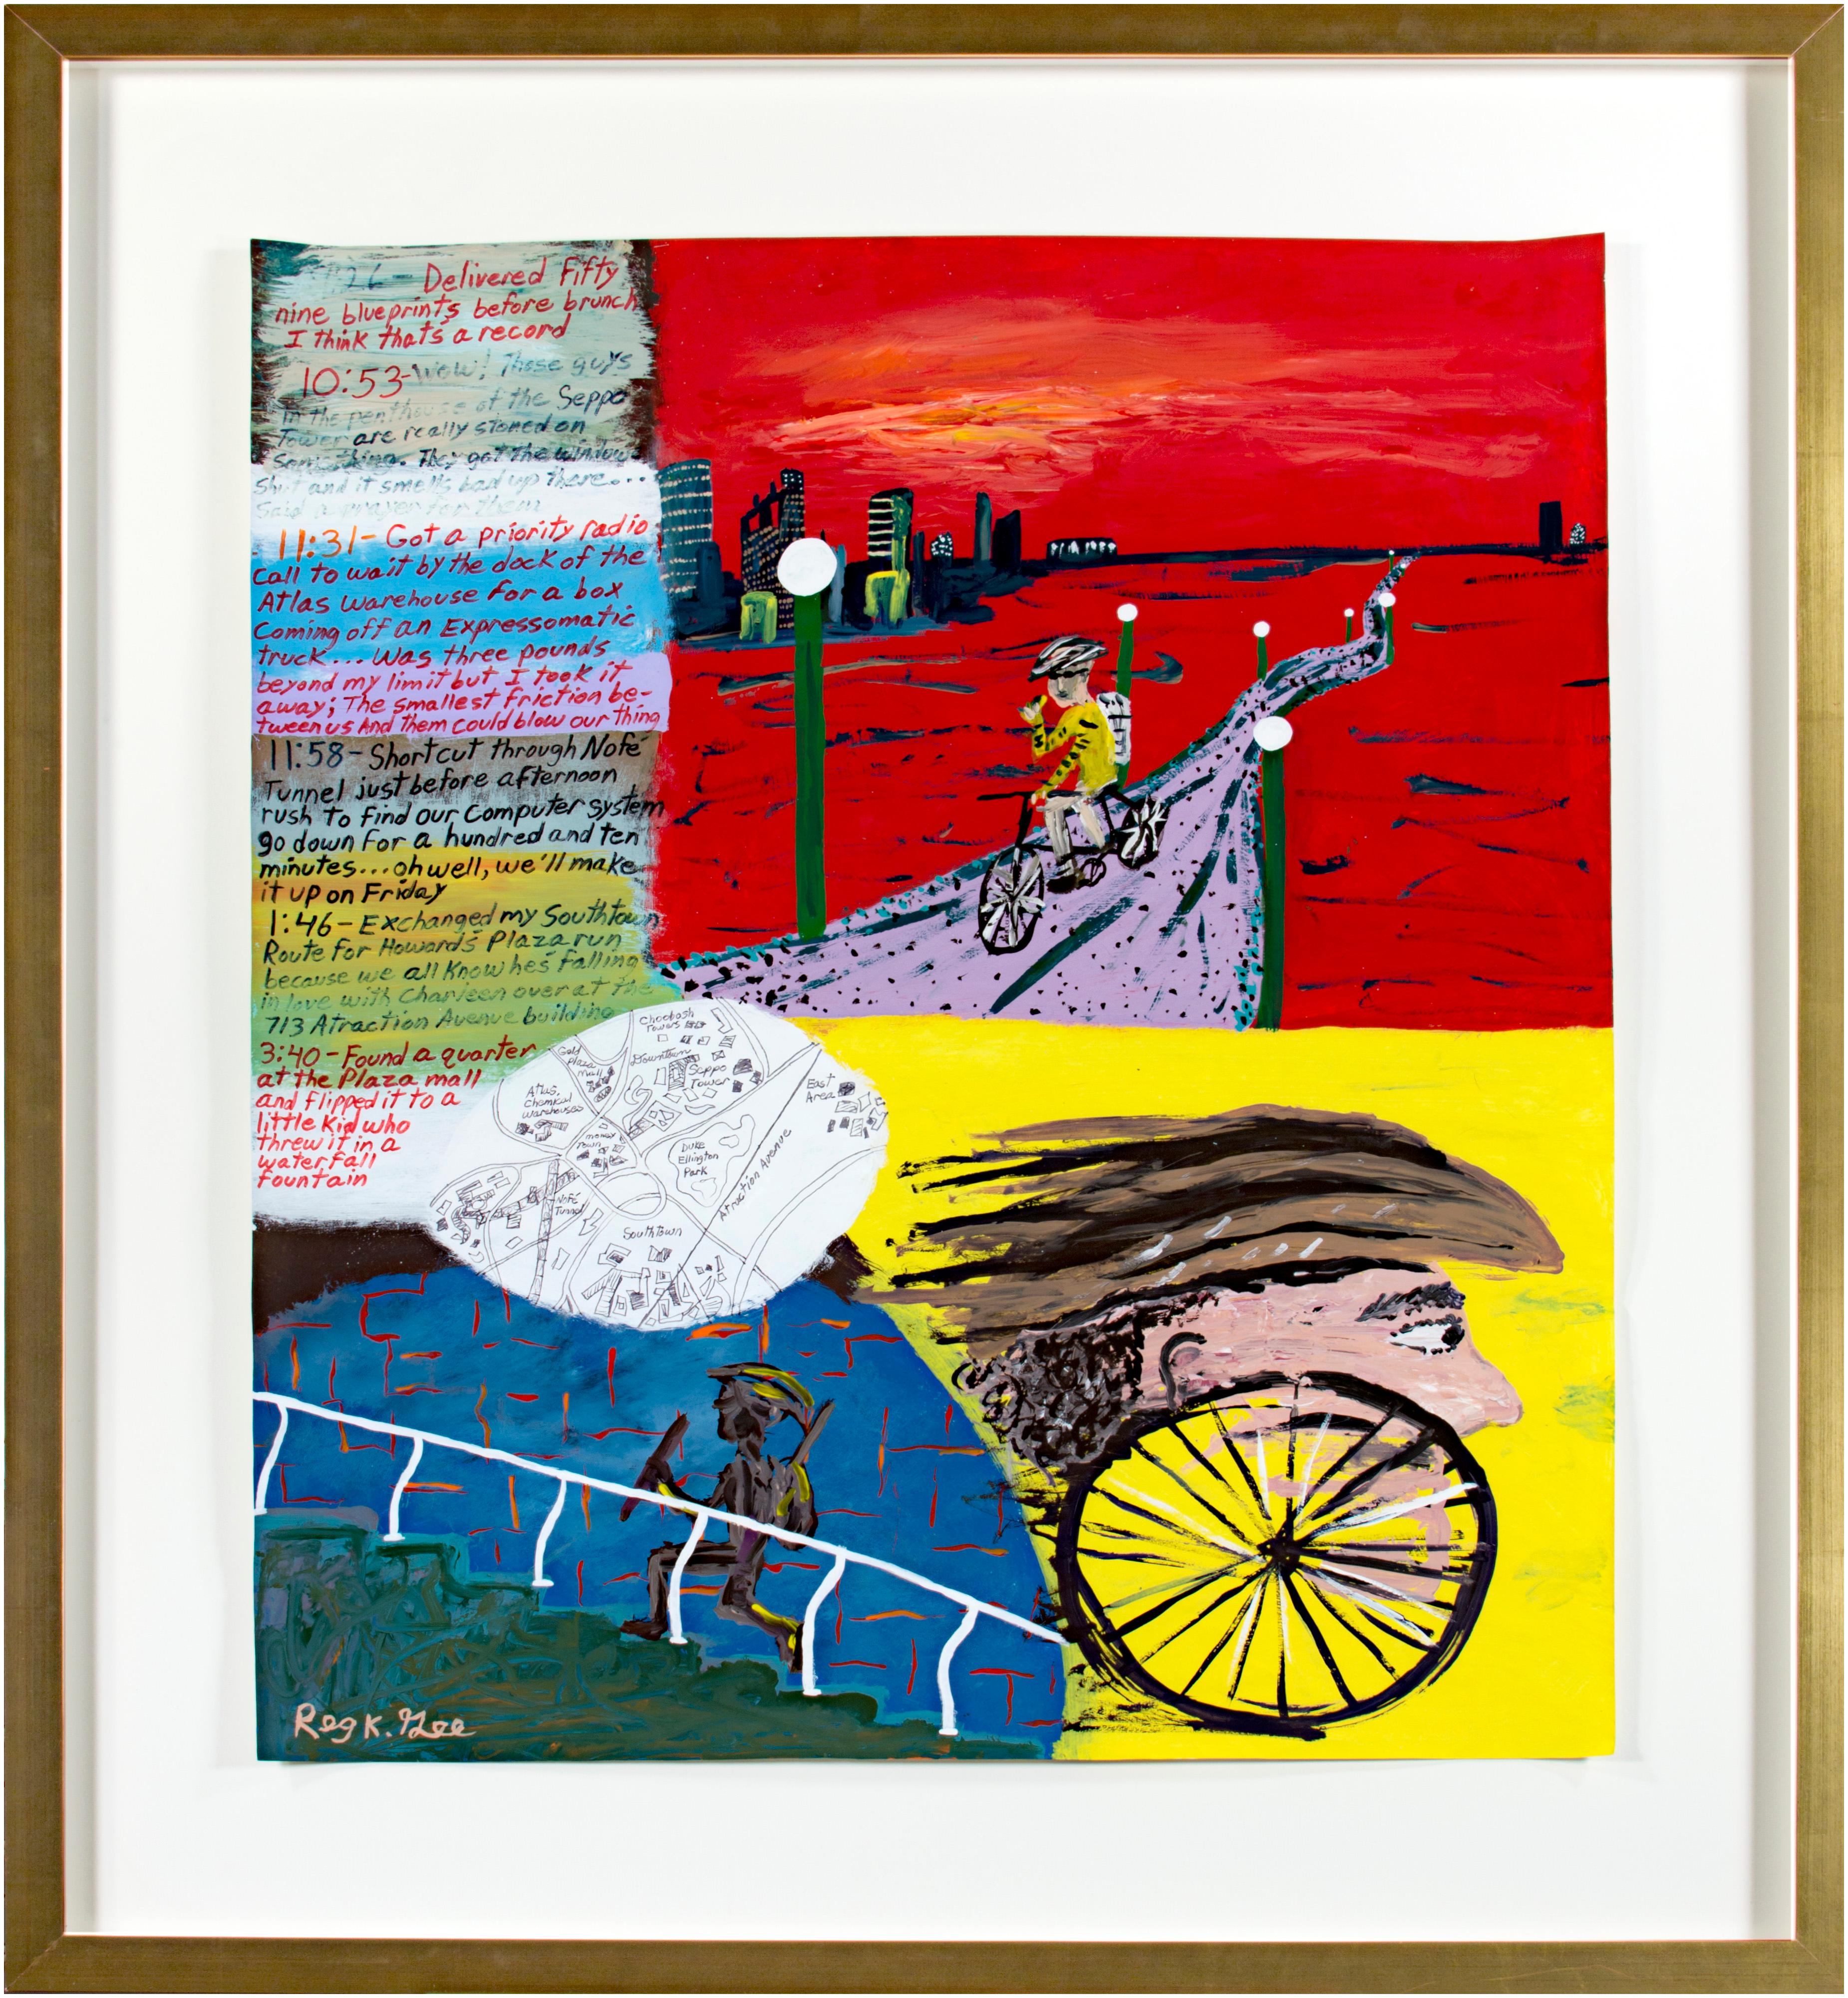 Reginald K. Gee Abstract Painting - 'Go-for Notations' original signed painting on parchment cycling running map